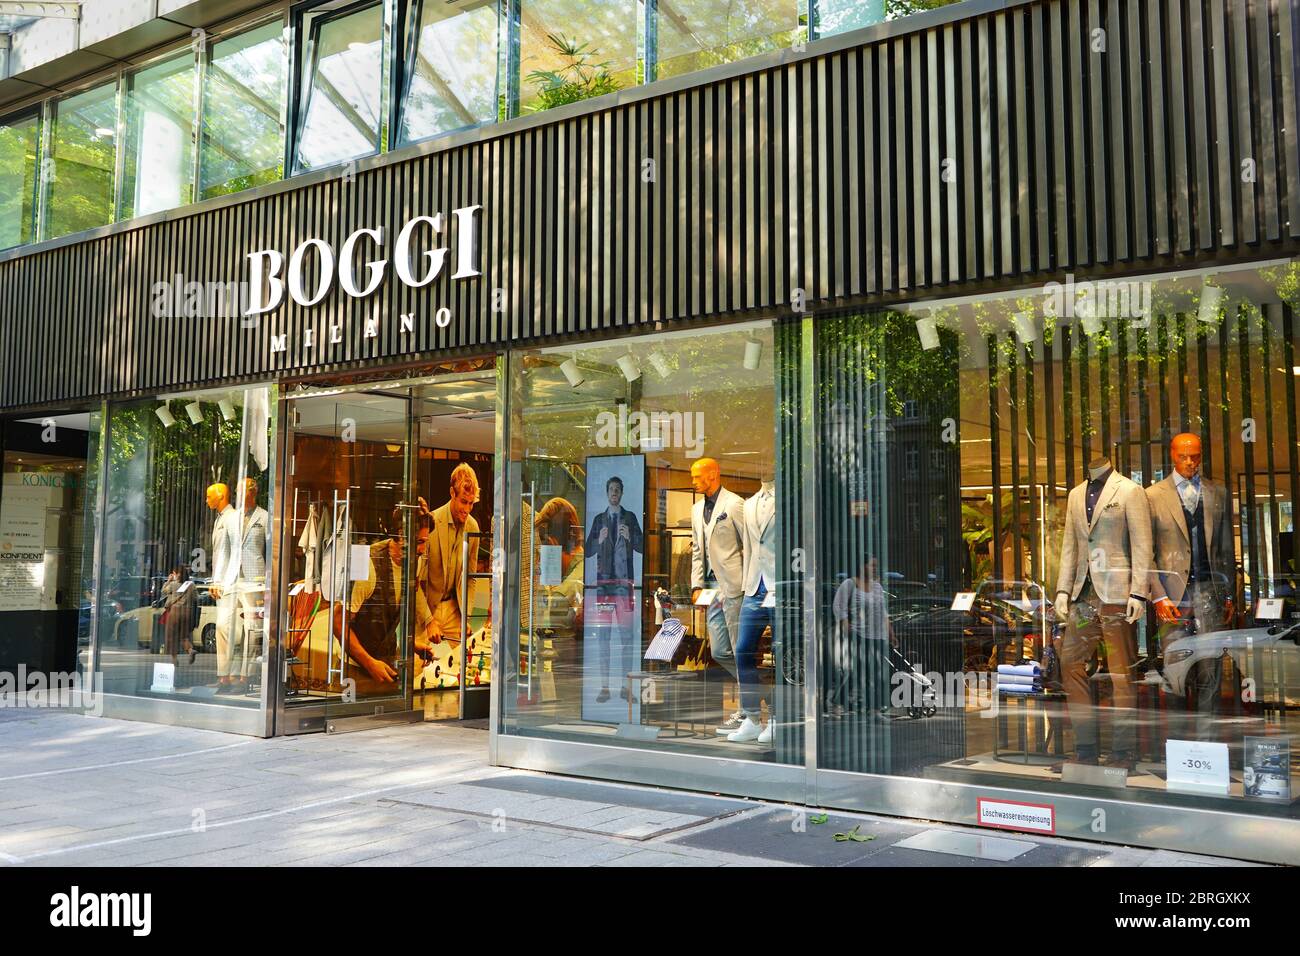 Exterior view of the men’s outfitter store „Boggi“ on Königsallee in Düsseldorf. This brand is popular for Italian quality and „gentlemen’s style“. Stock Photo